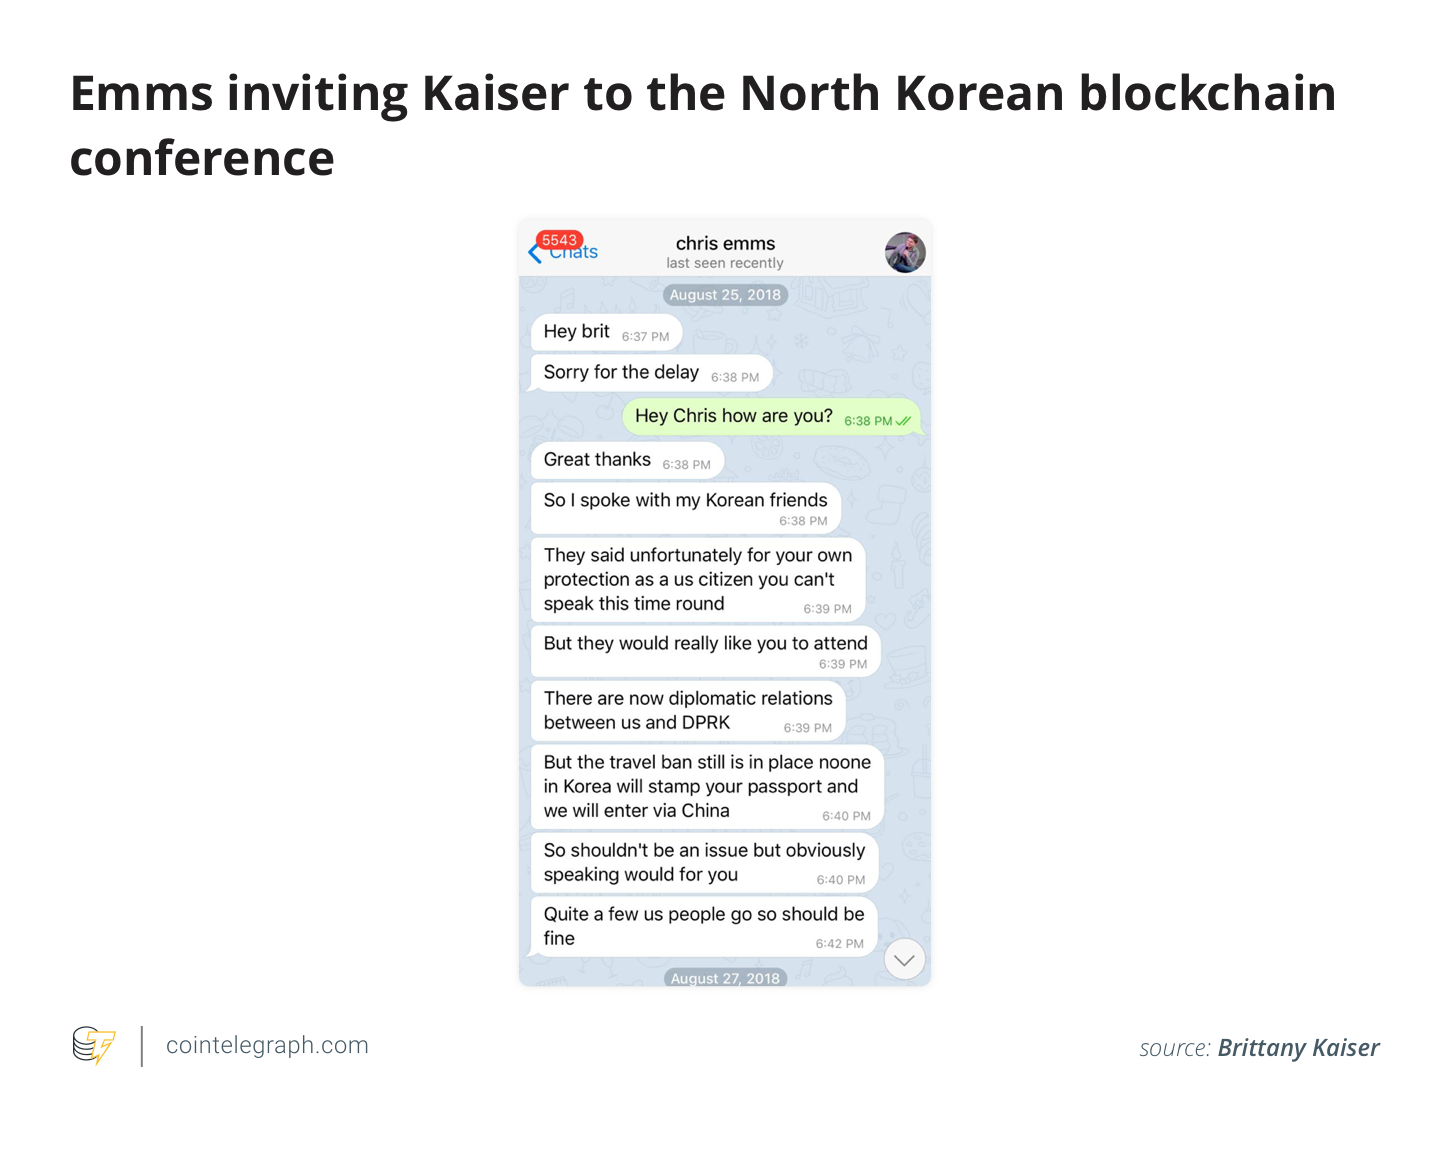 Emms inviting Kaiser to the North Korean blockchain conference